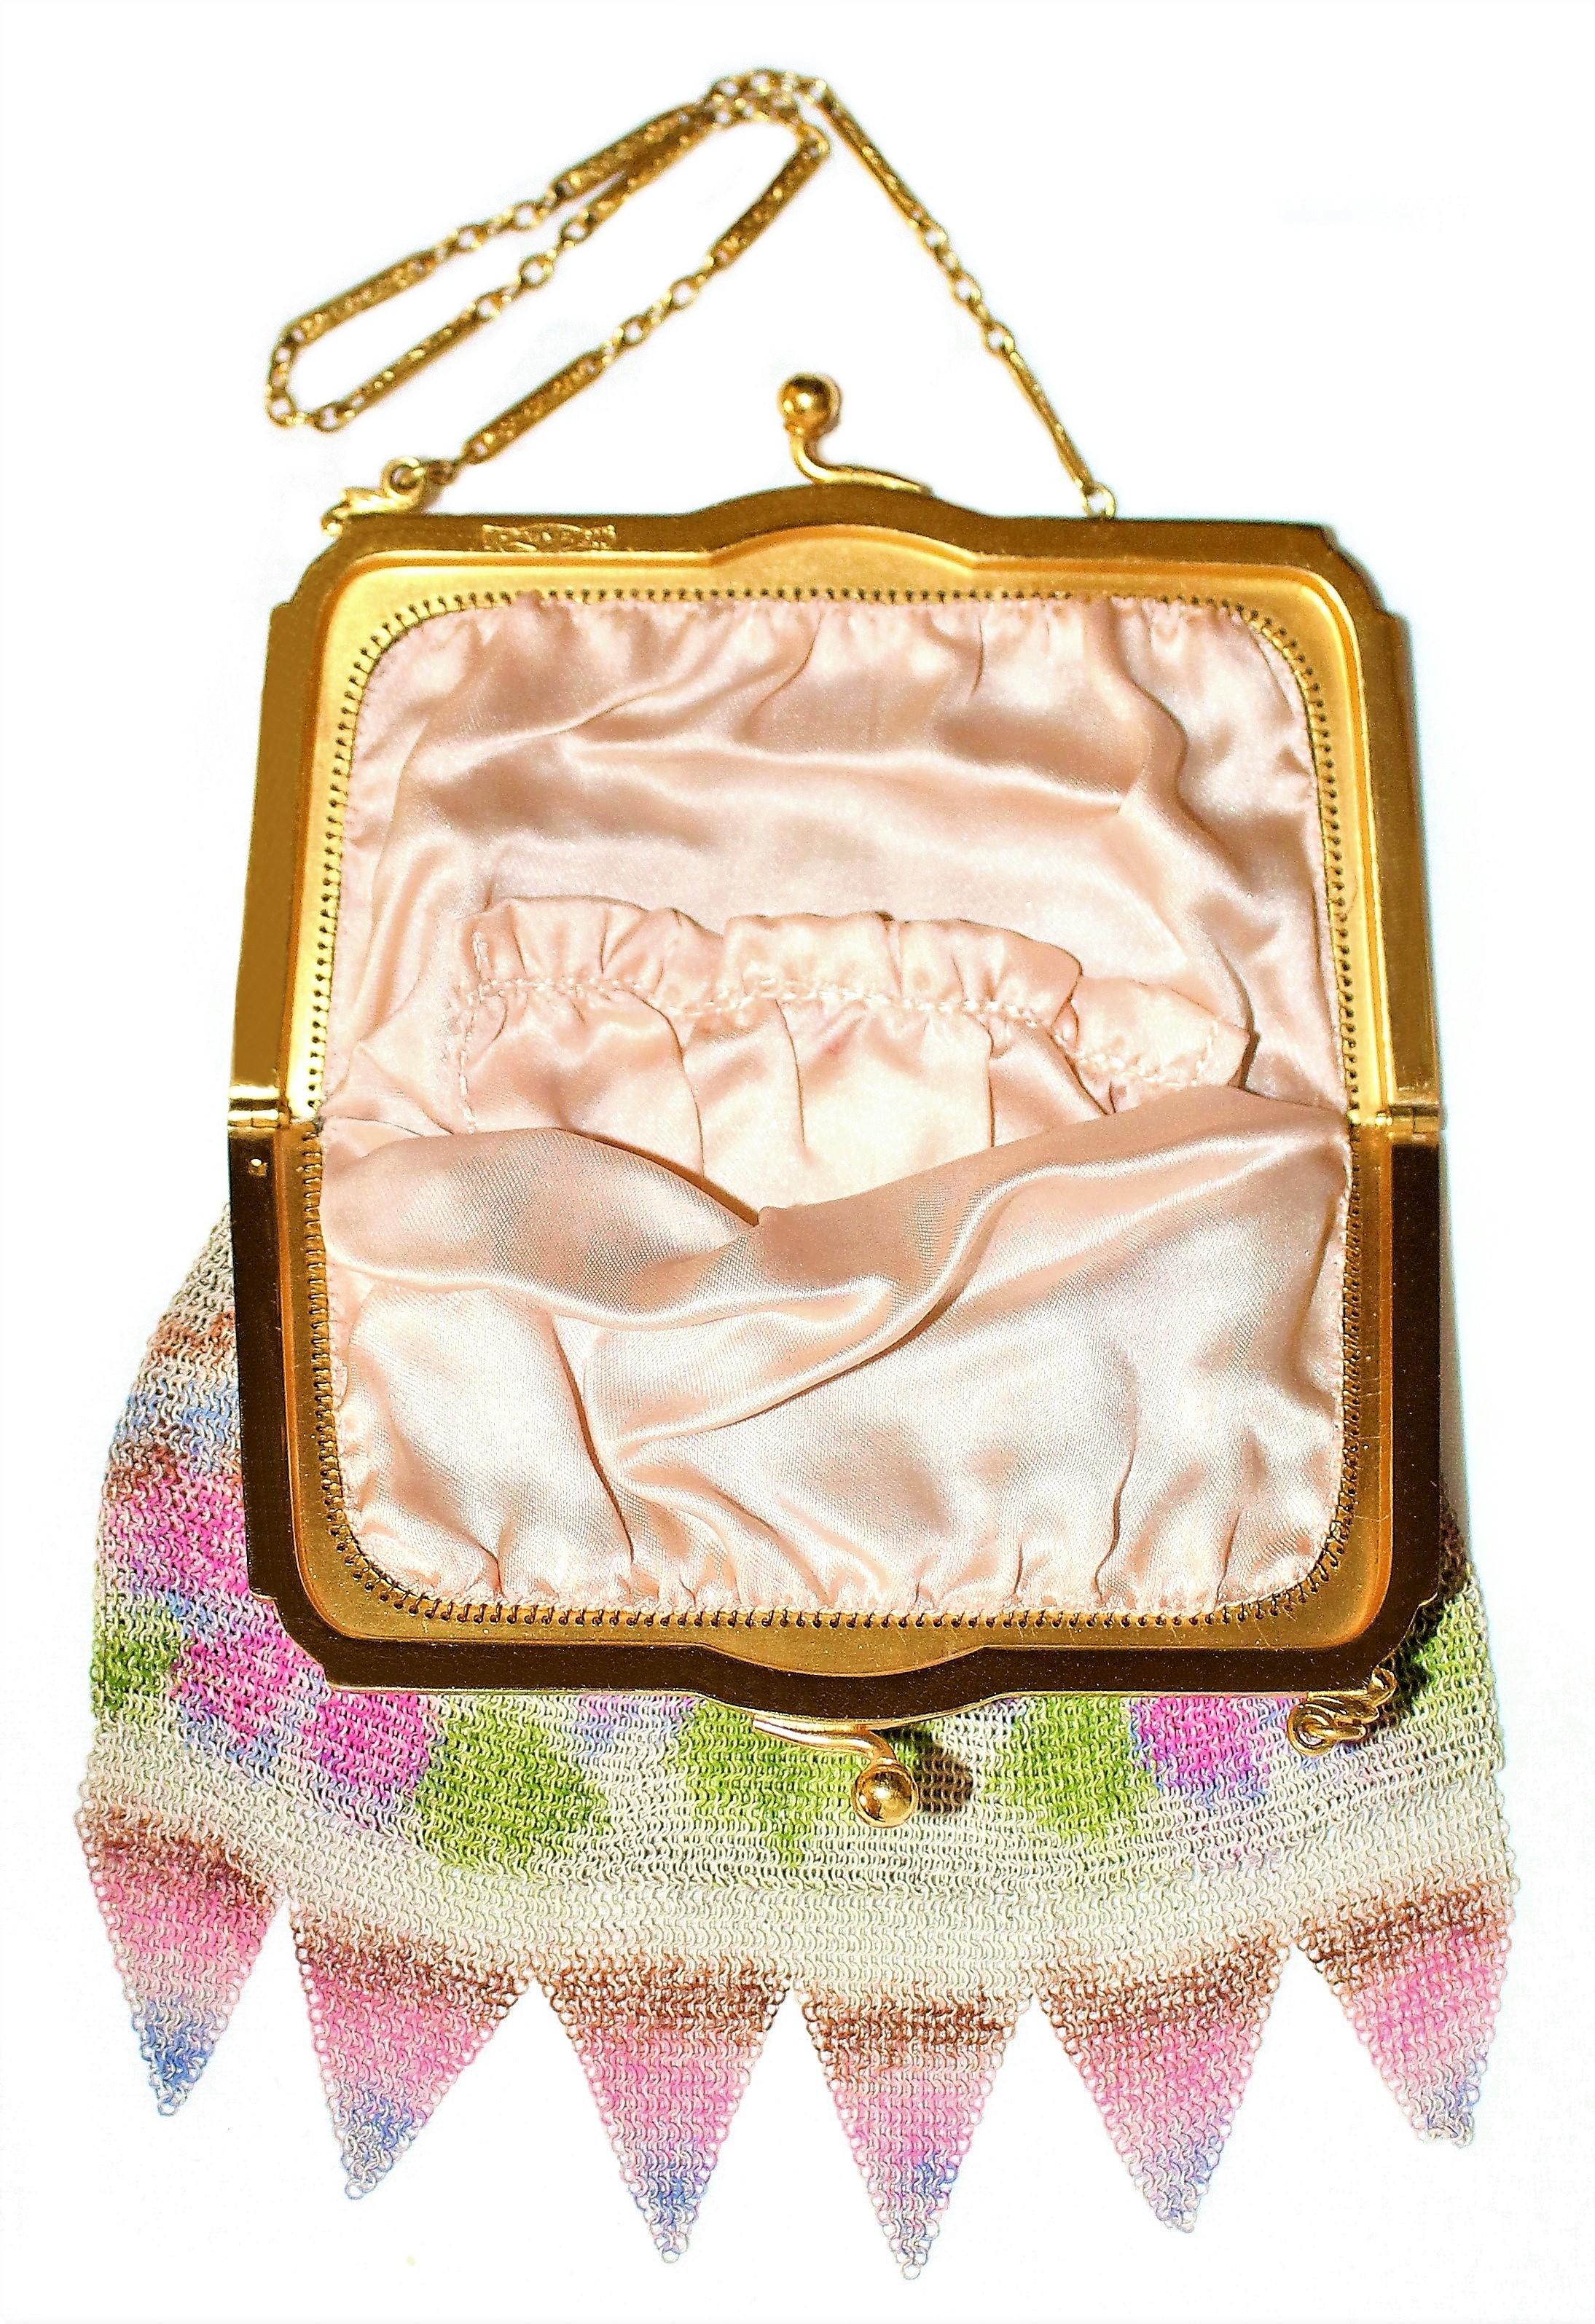 Circa 1920s Whiting & Davis Dresden Mesh Purse  In Good Condition For Sale In Long Beach, CA